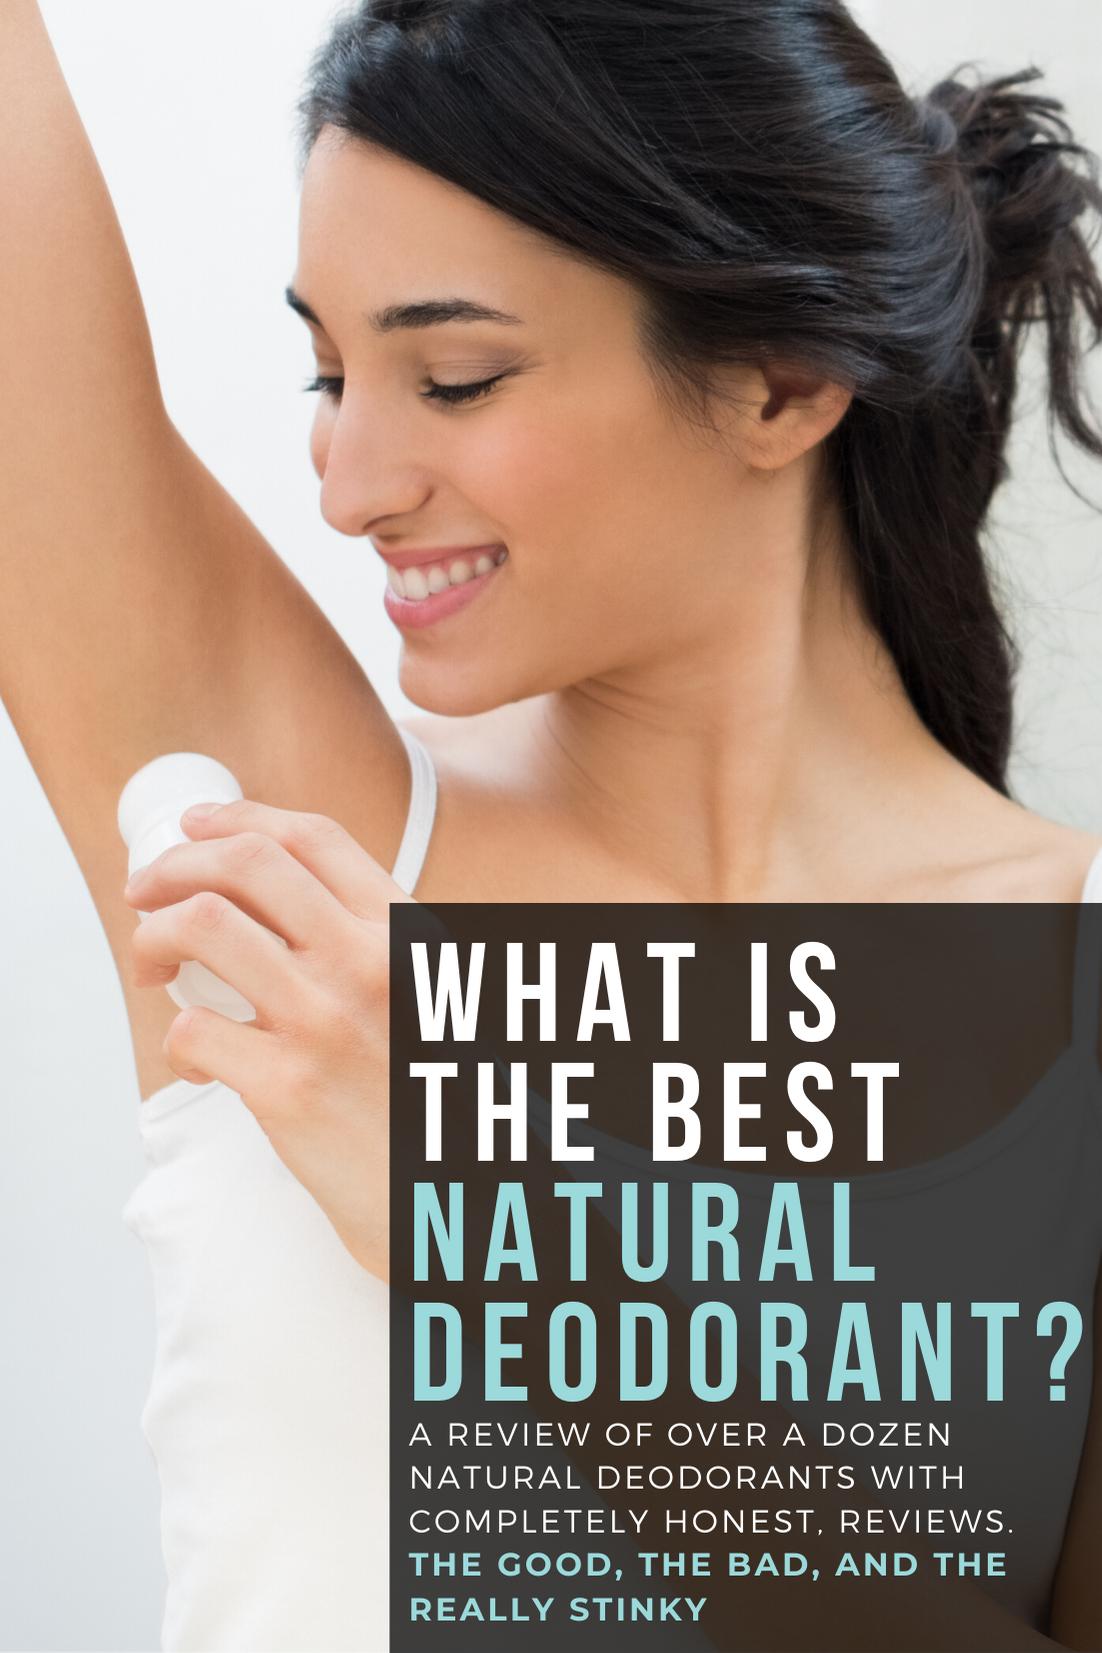 How To Get Deodorant Stains Out Of Bras: 7 Natural Solutions